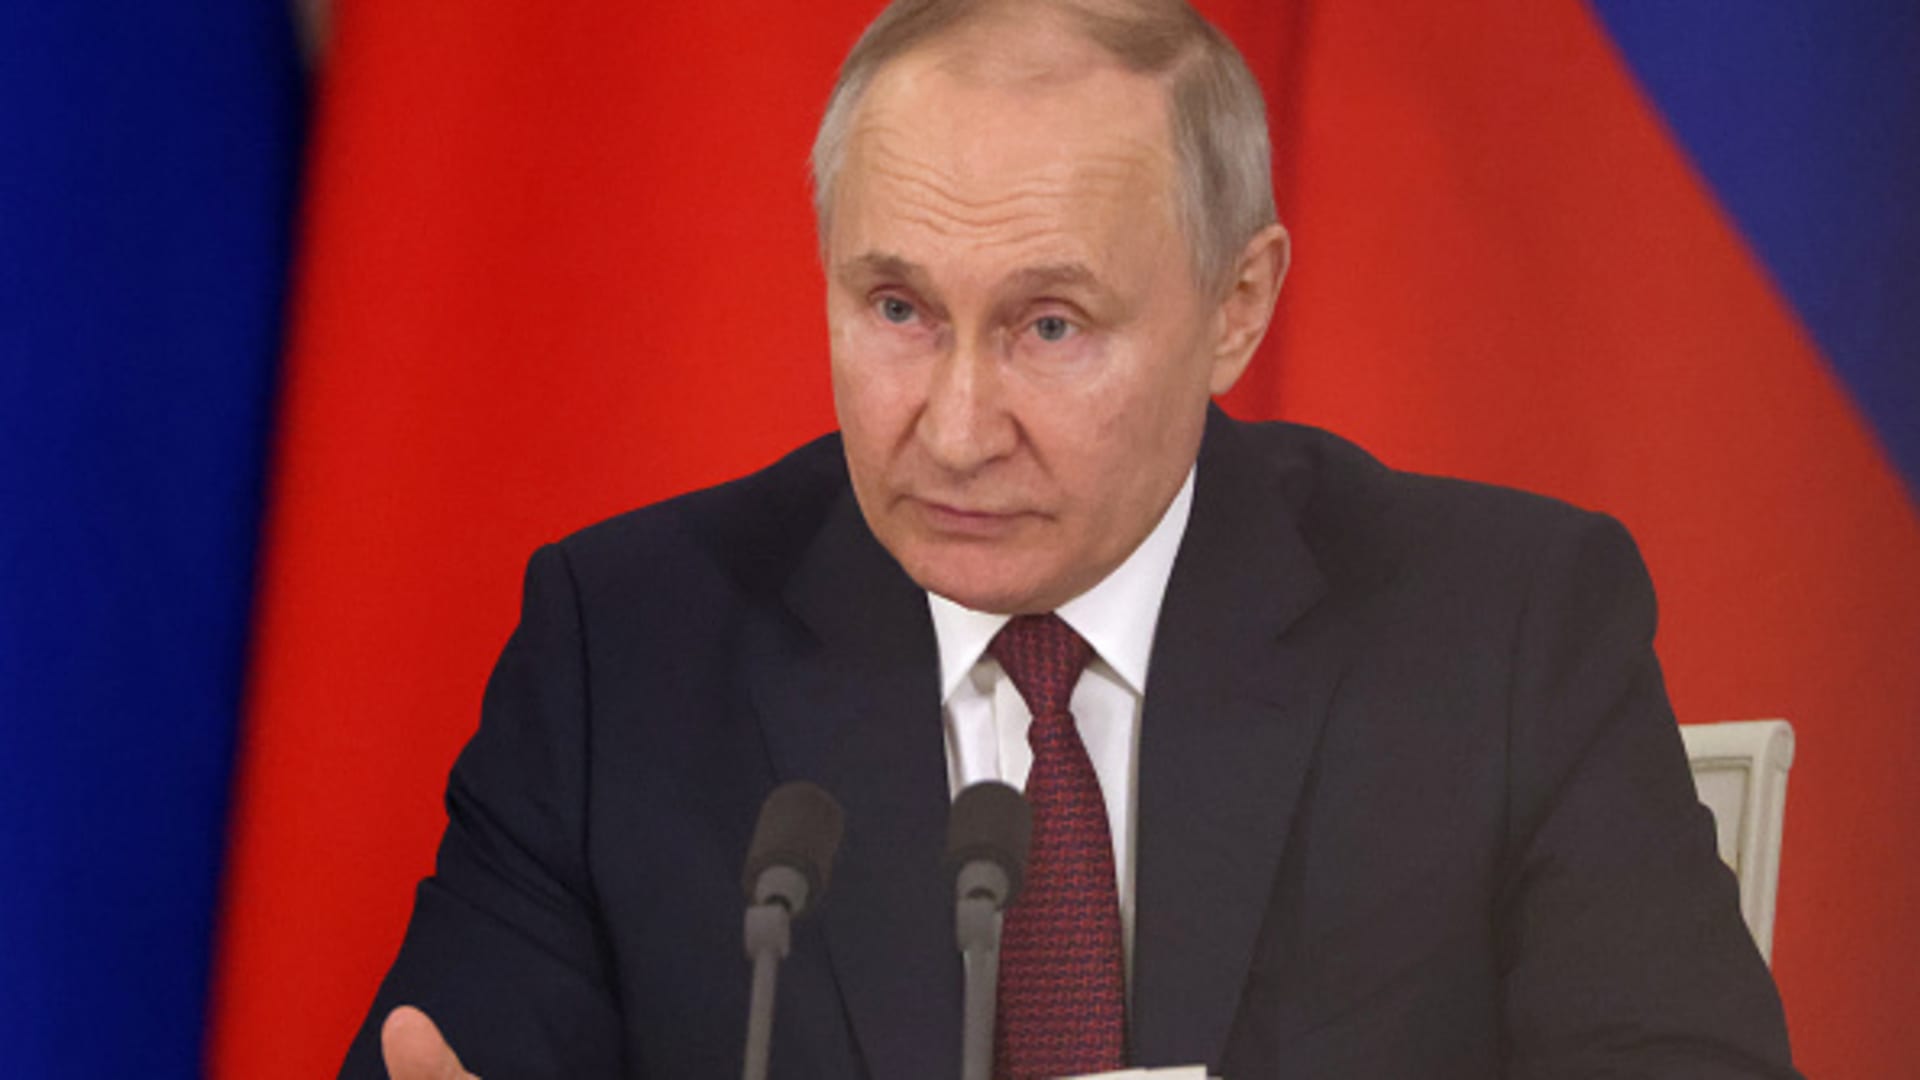 Putin says Moscow to station nuclear weapons in Belarus for the first time since the 1990s